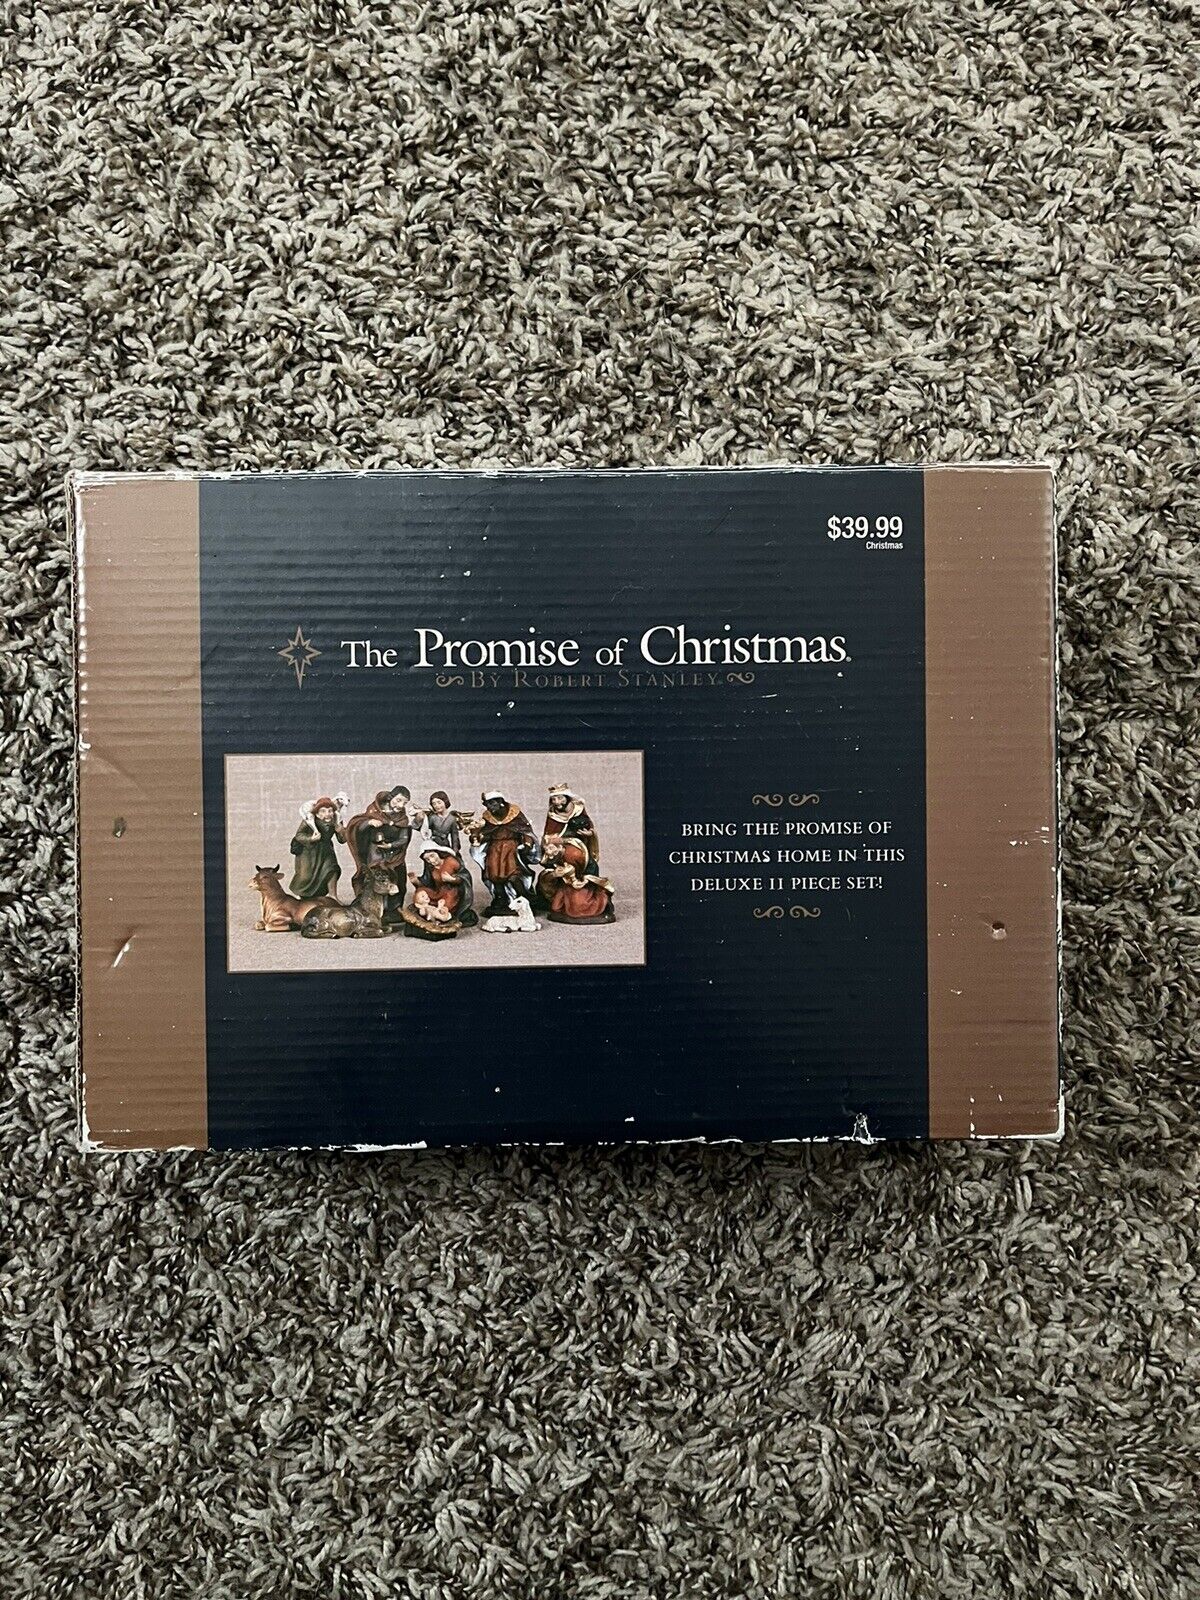 Brand New The Promise of Christmas Nativity Scene by Robert Stanley 11 piece set